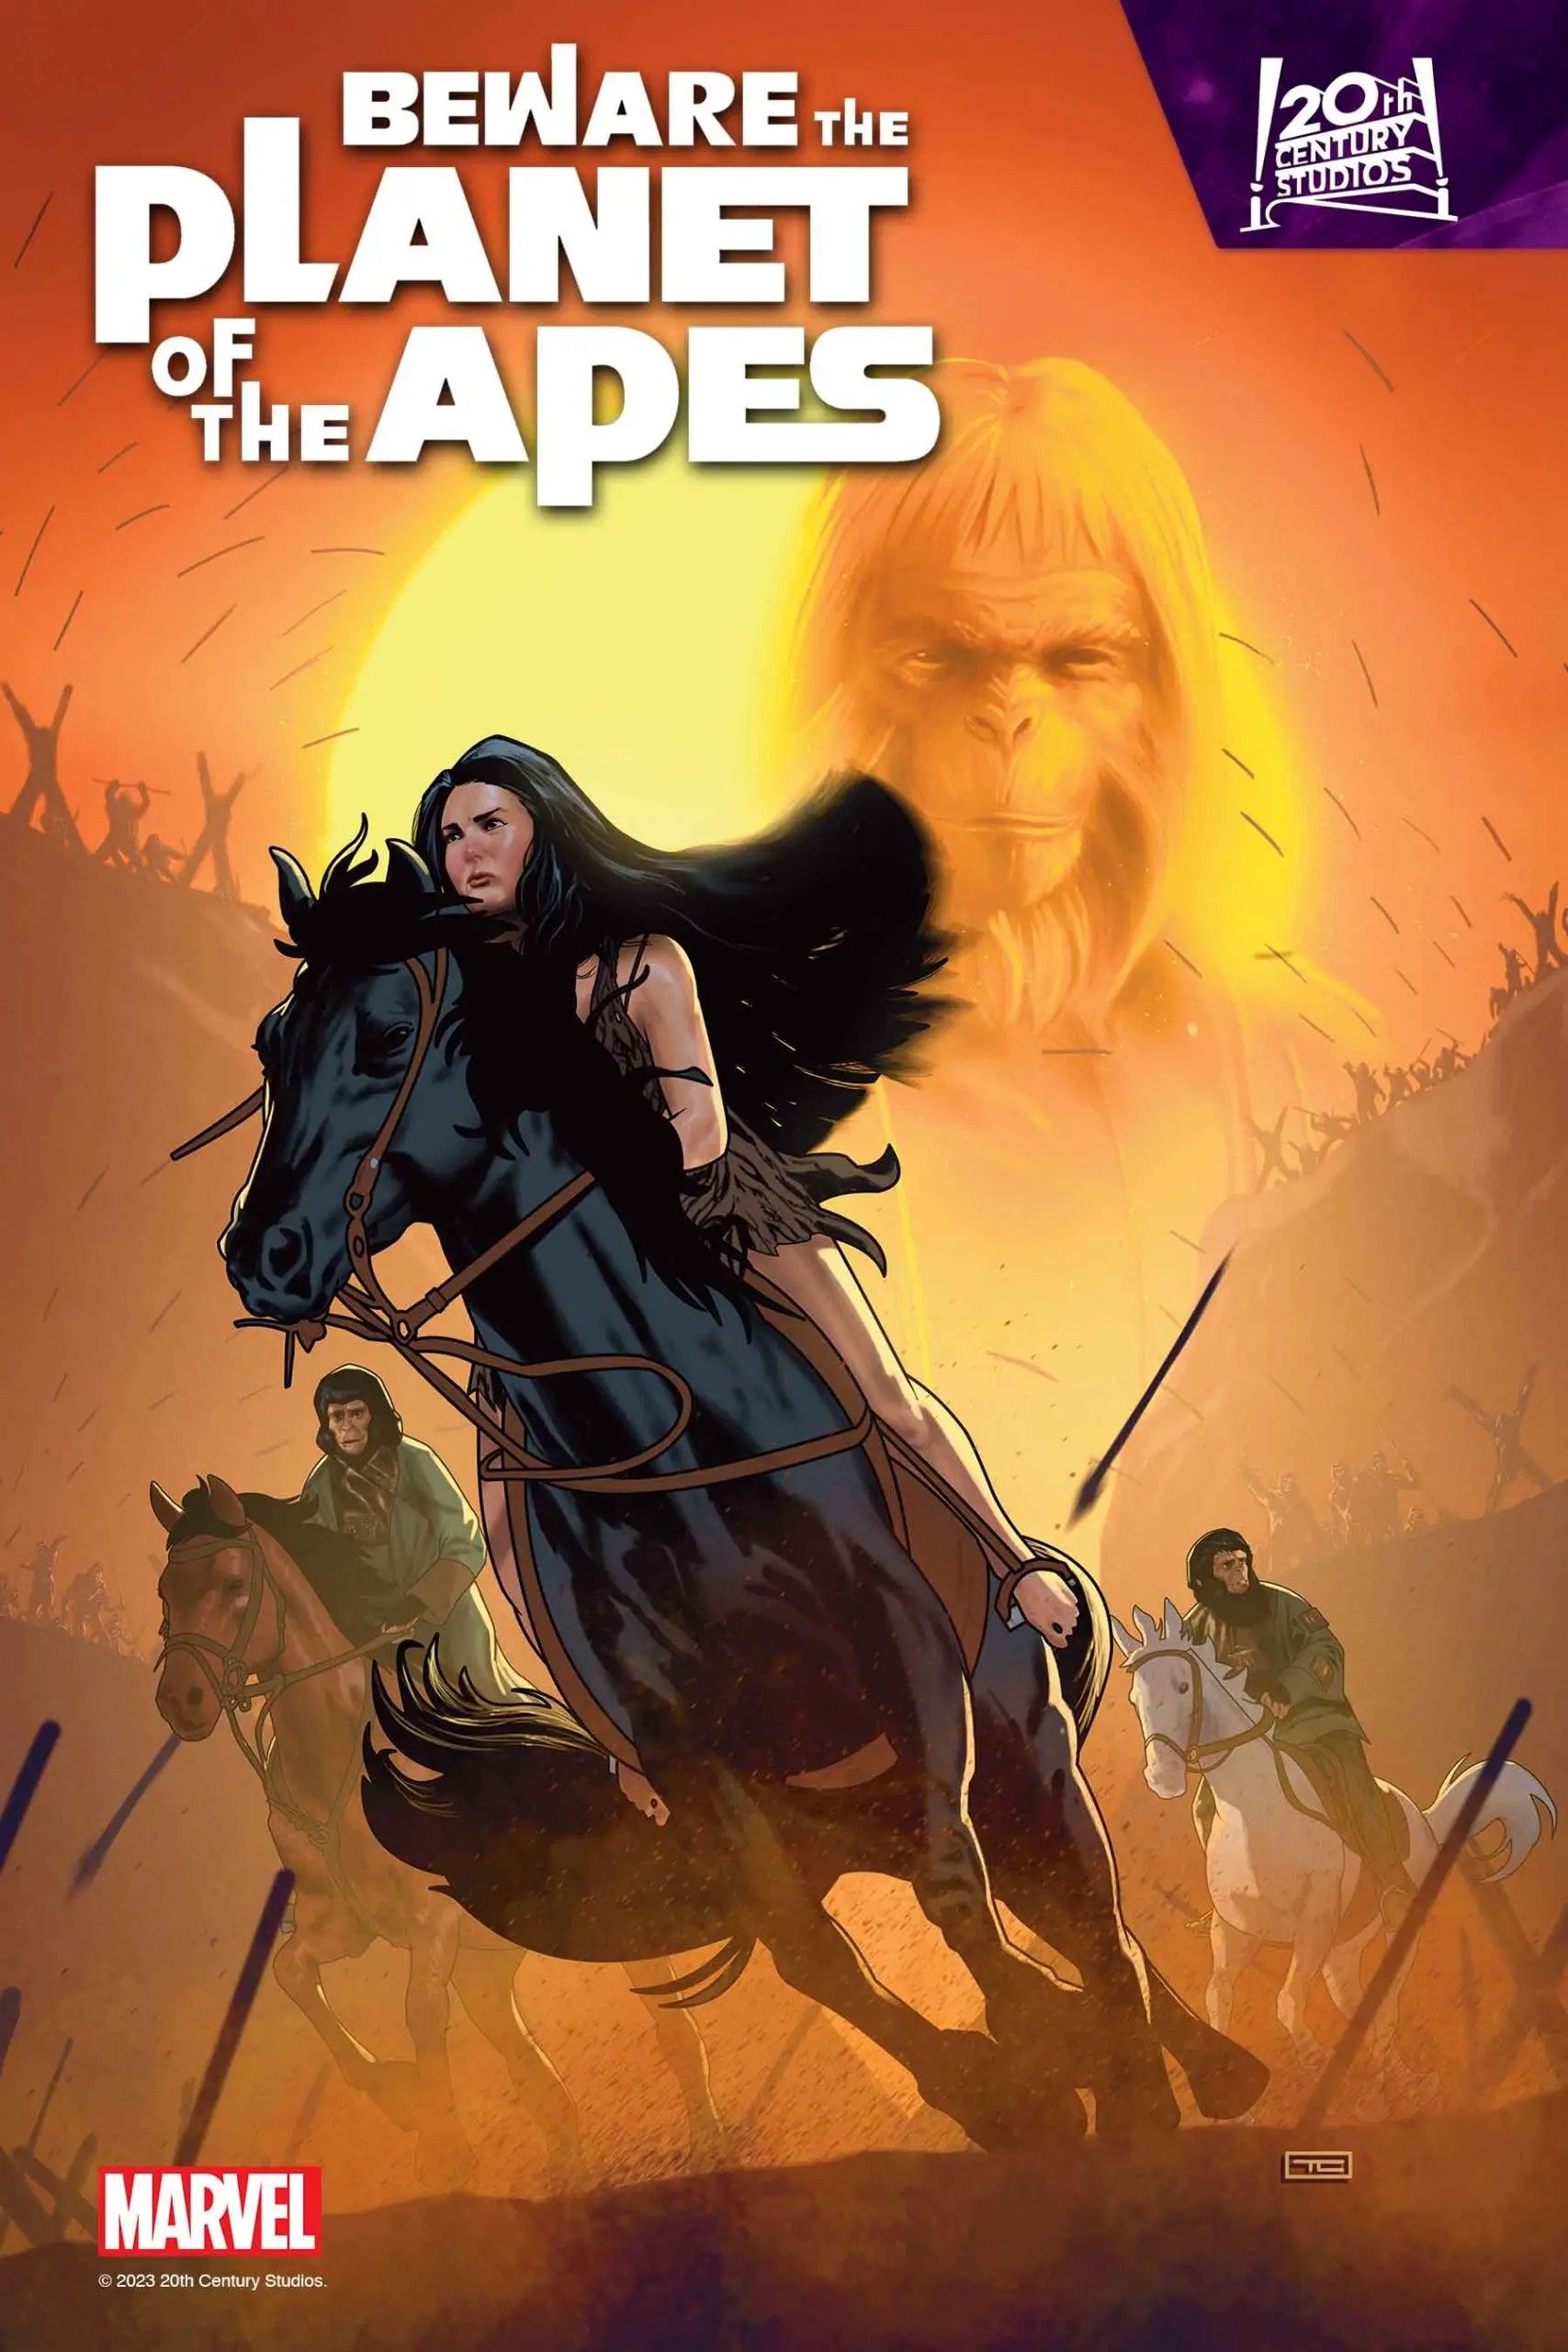 BEWARE THE PLANET OF THE APES 1 PREVIEW COVER